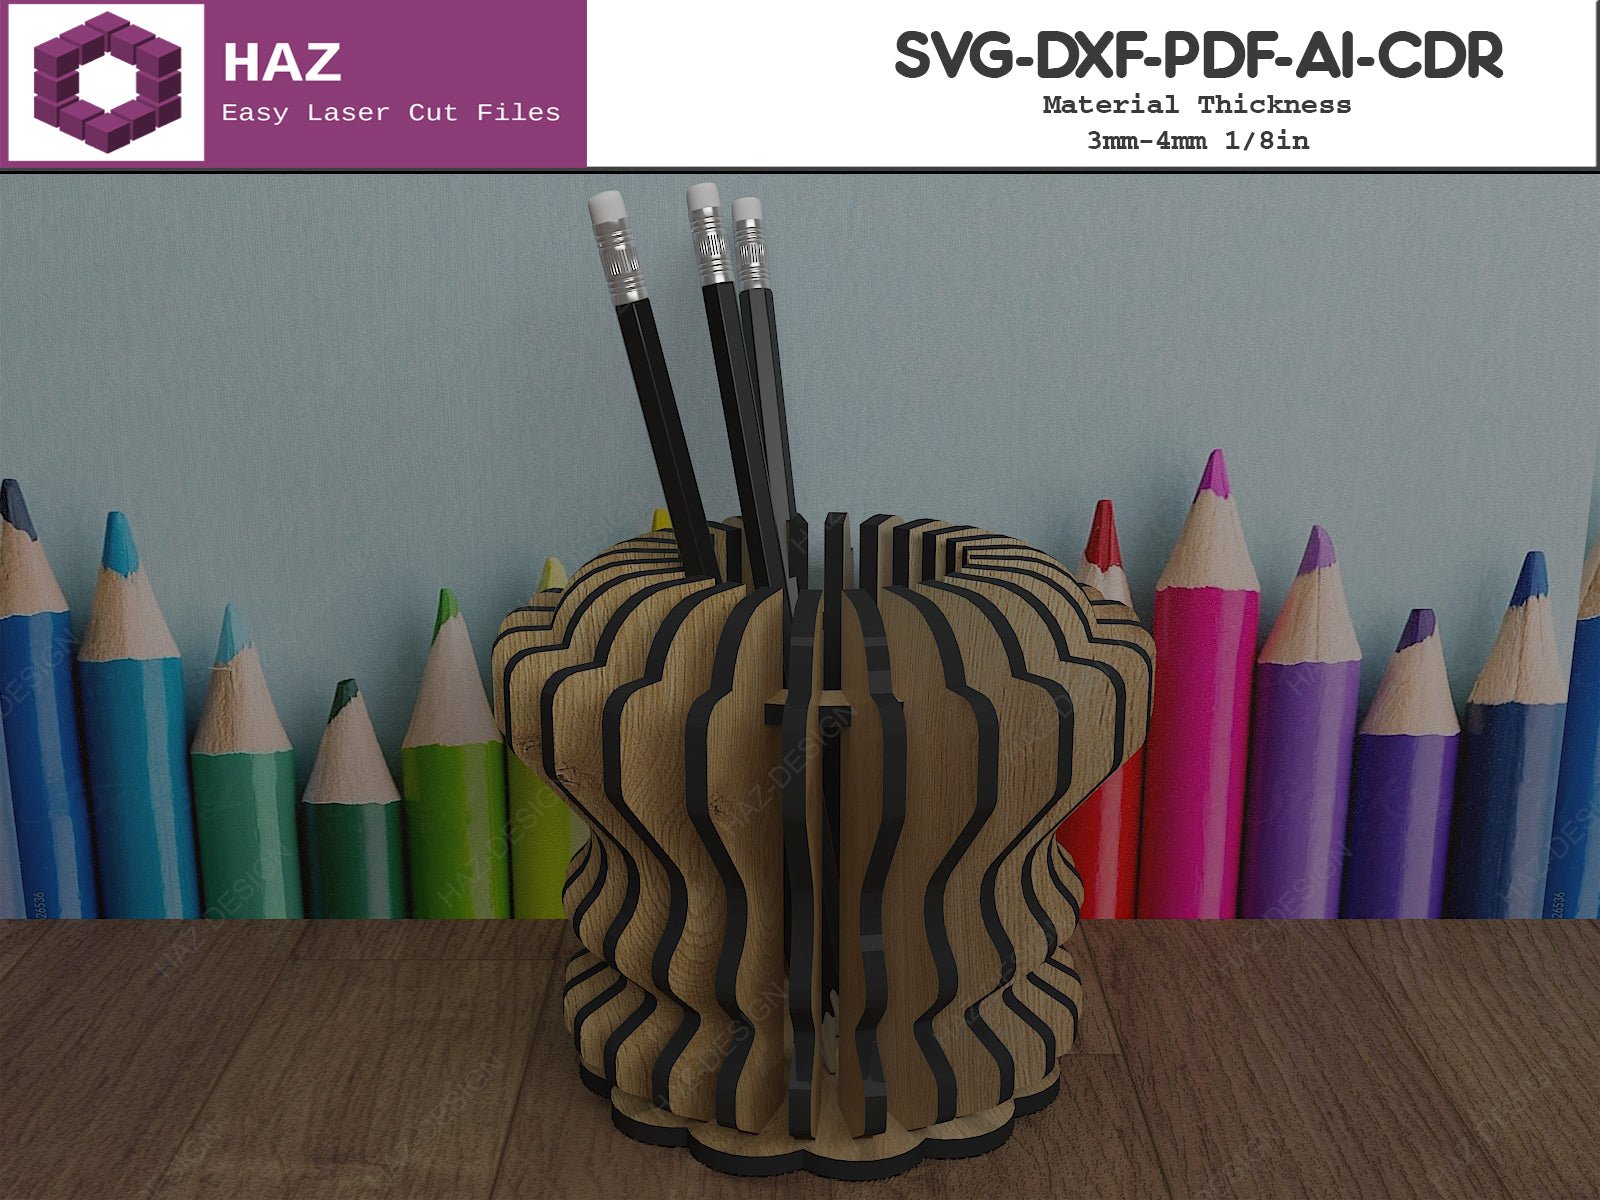 Wood Pencil Holder / Tabletop Pen Display Stand SVG DXF CDR Ai 088